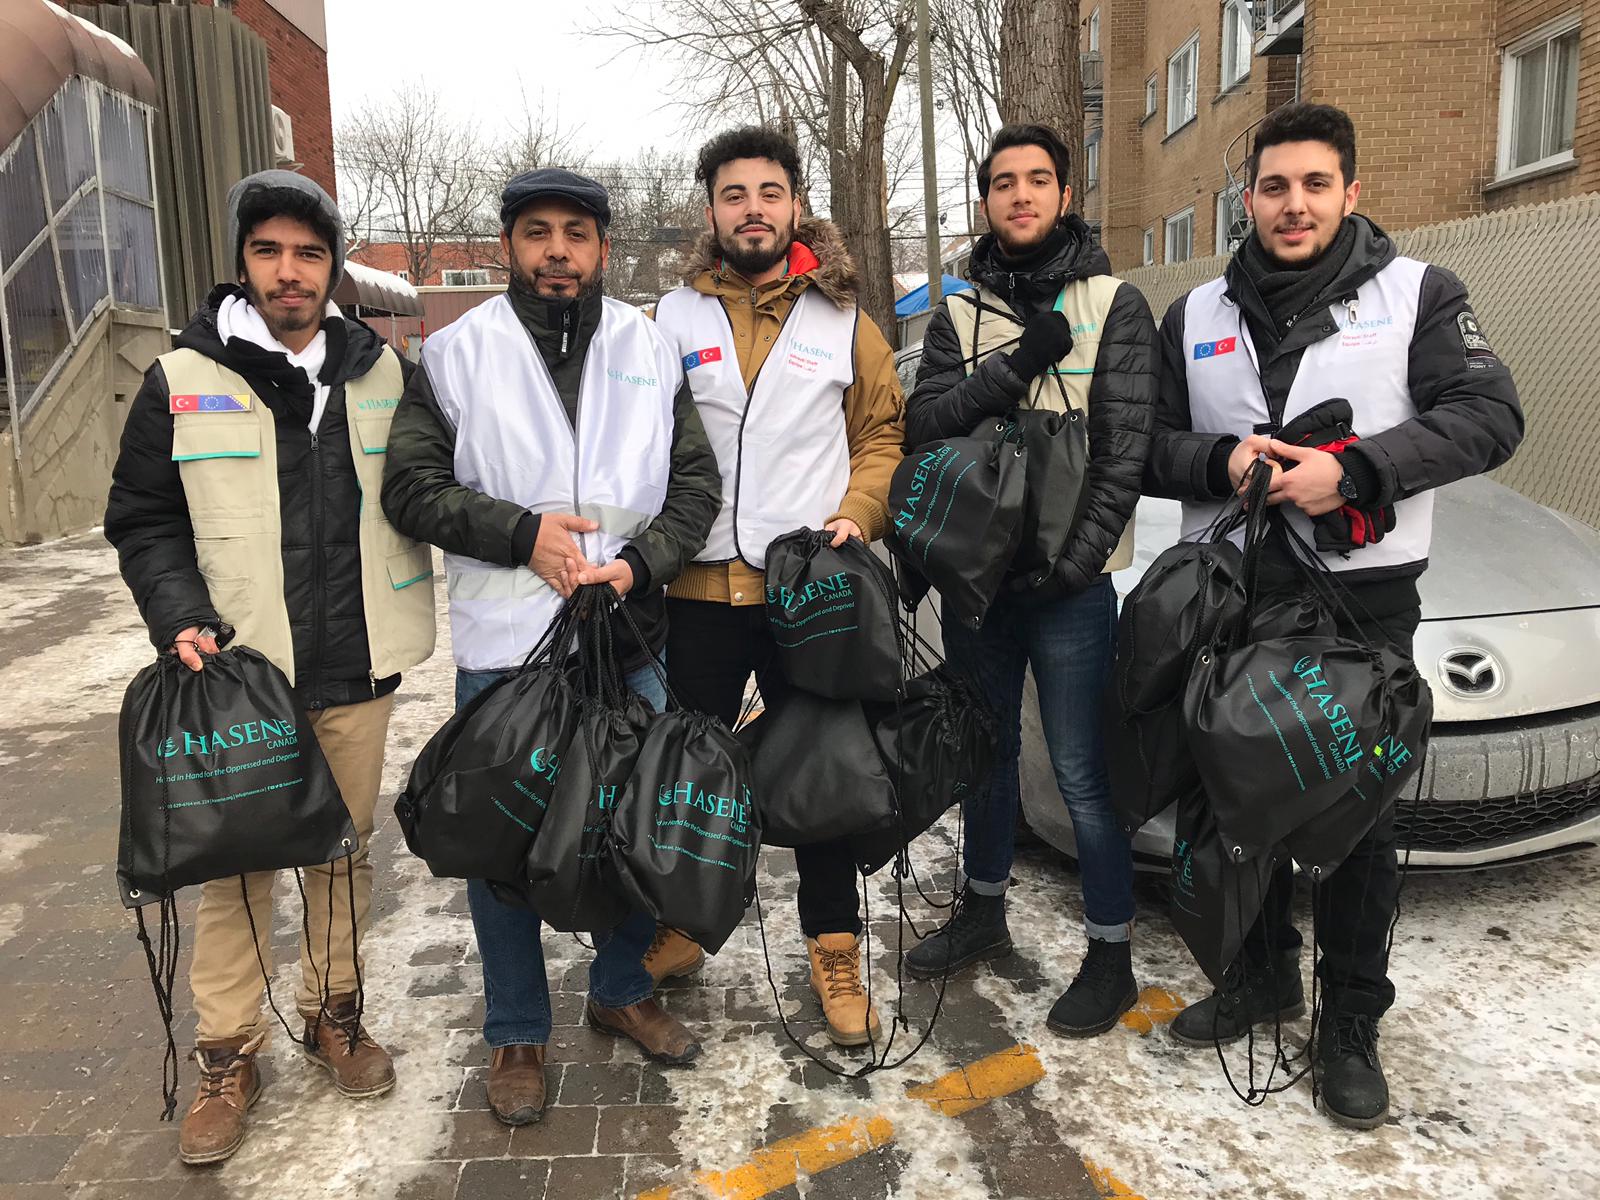 NEWS – Hasene Canada Distributed Winter Survival Kits for the Homeless in Montreal